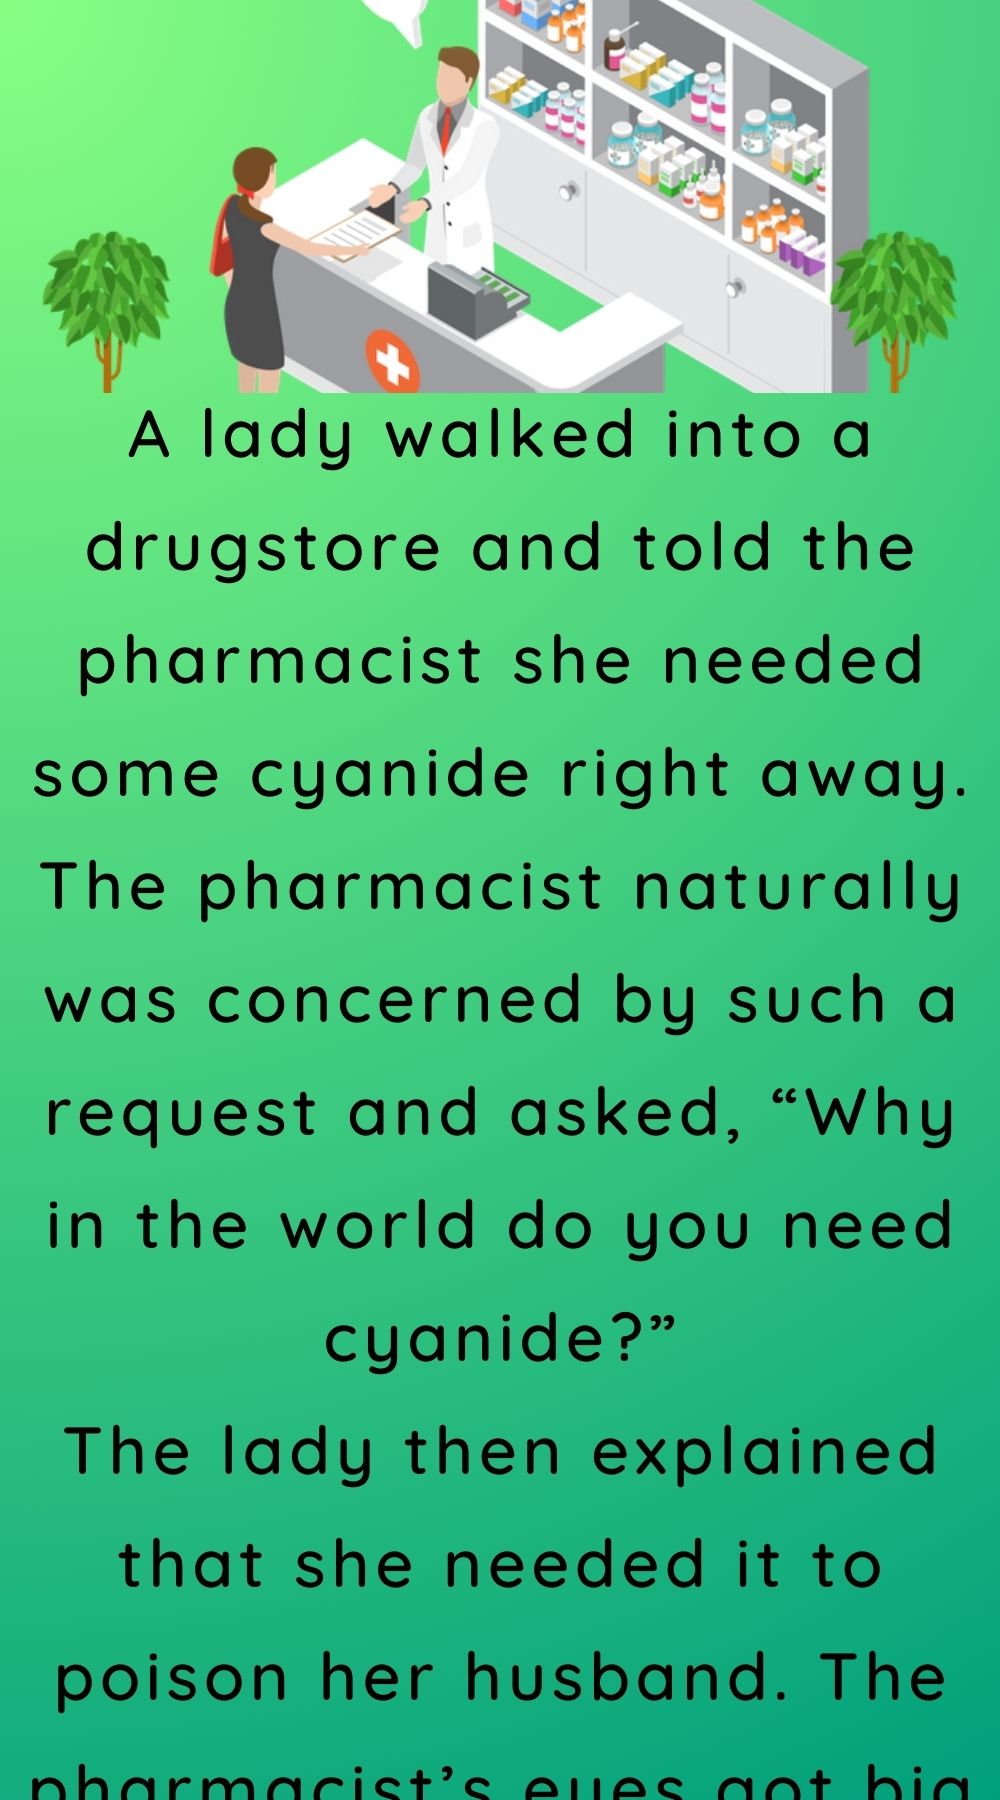 A lady walked into a drugstore